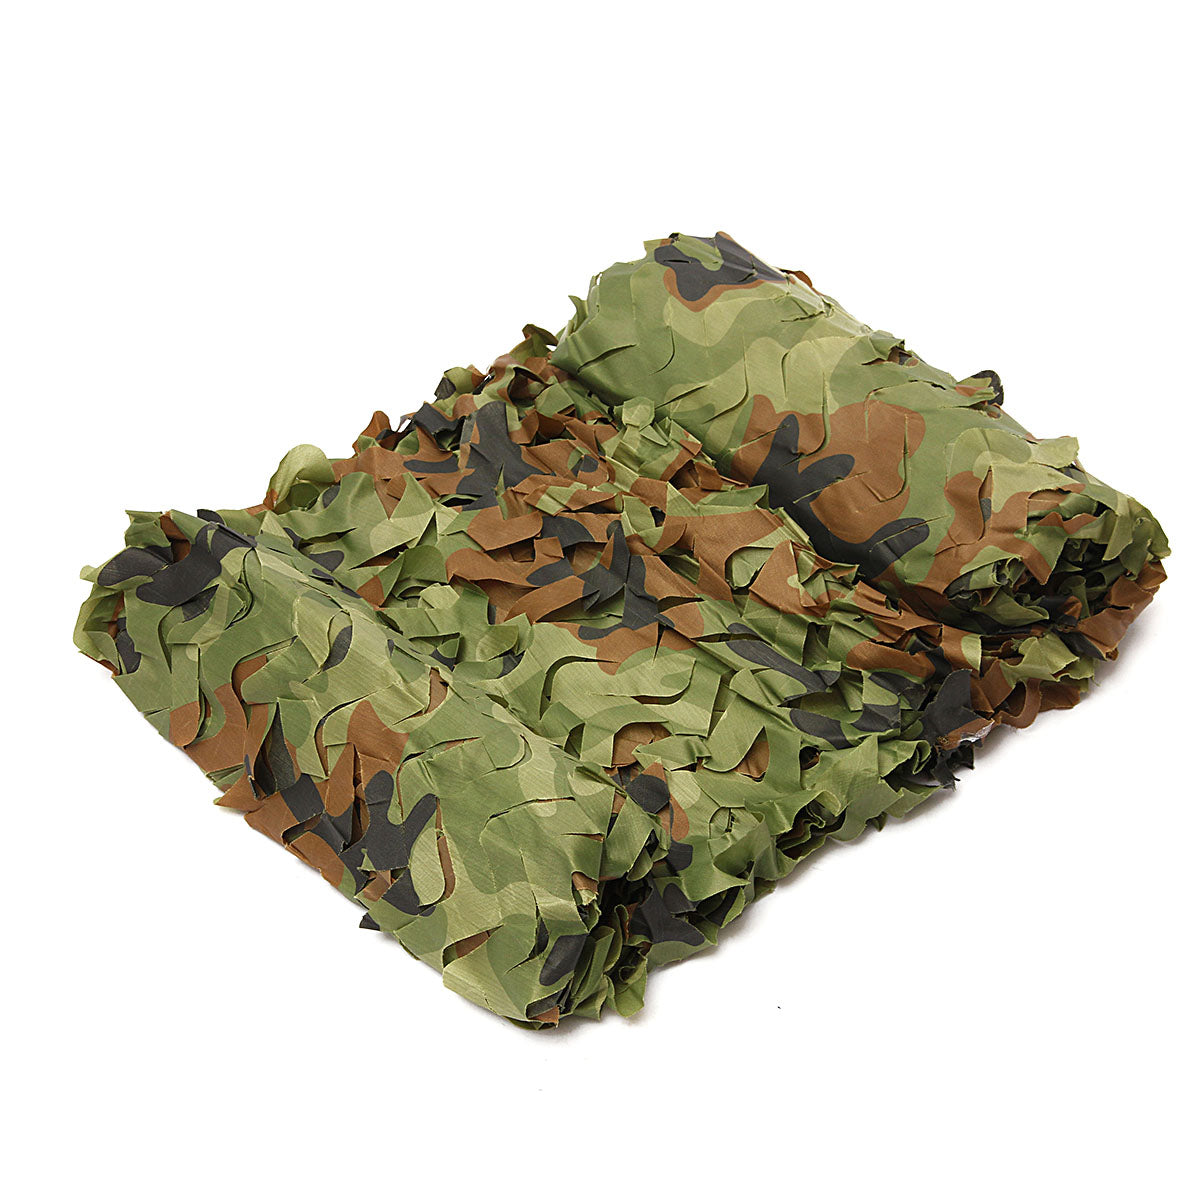 Dim Gray 7mx2m Camo Camouflage Net For Car Cover Camping Military CS Hunting Shooting Hide